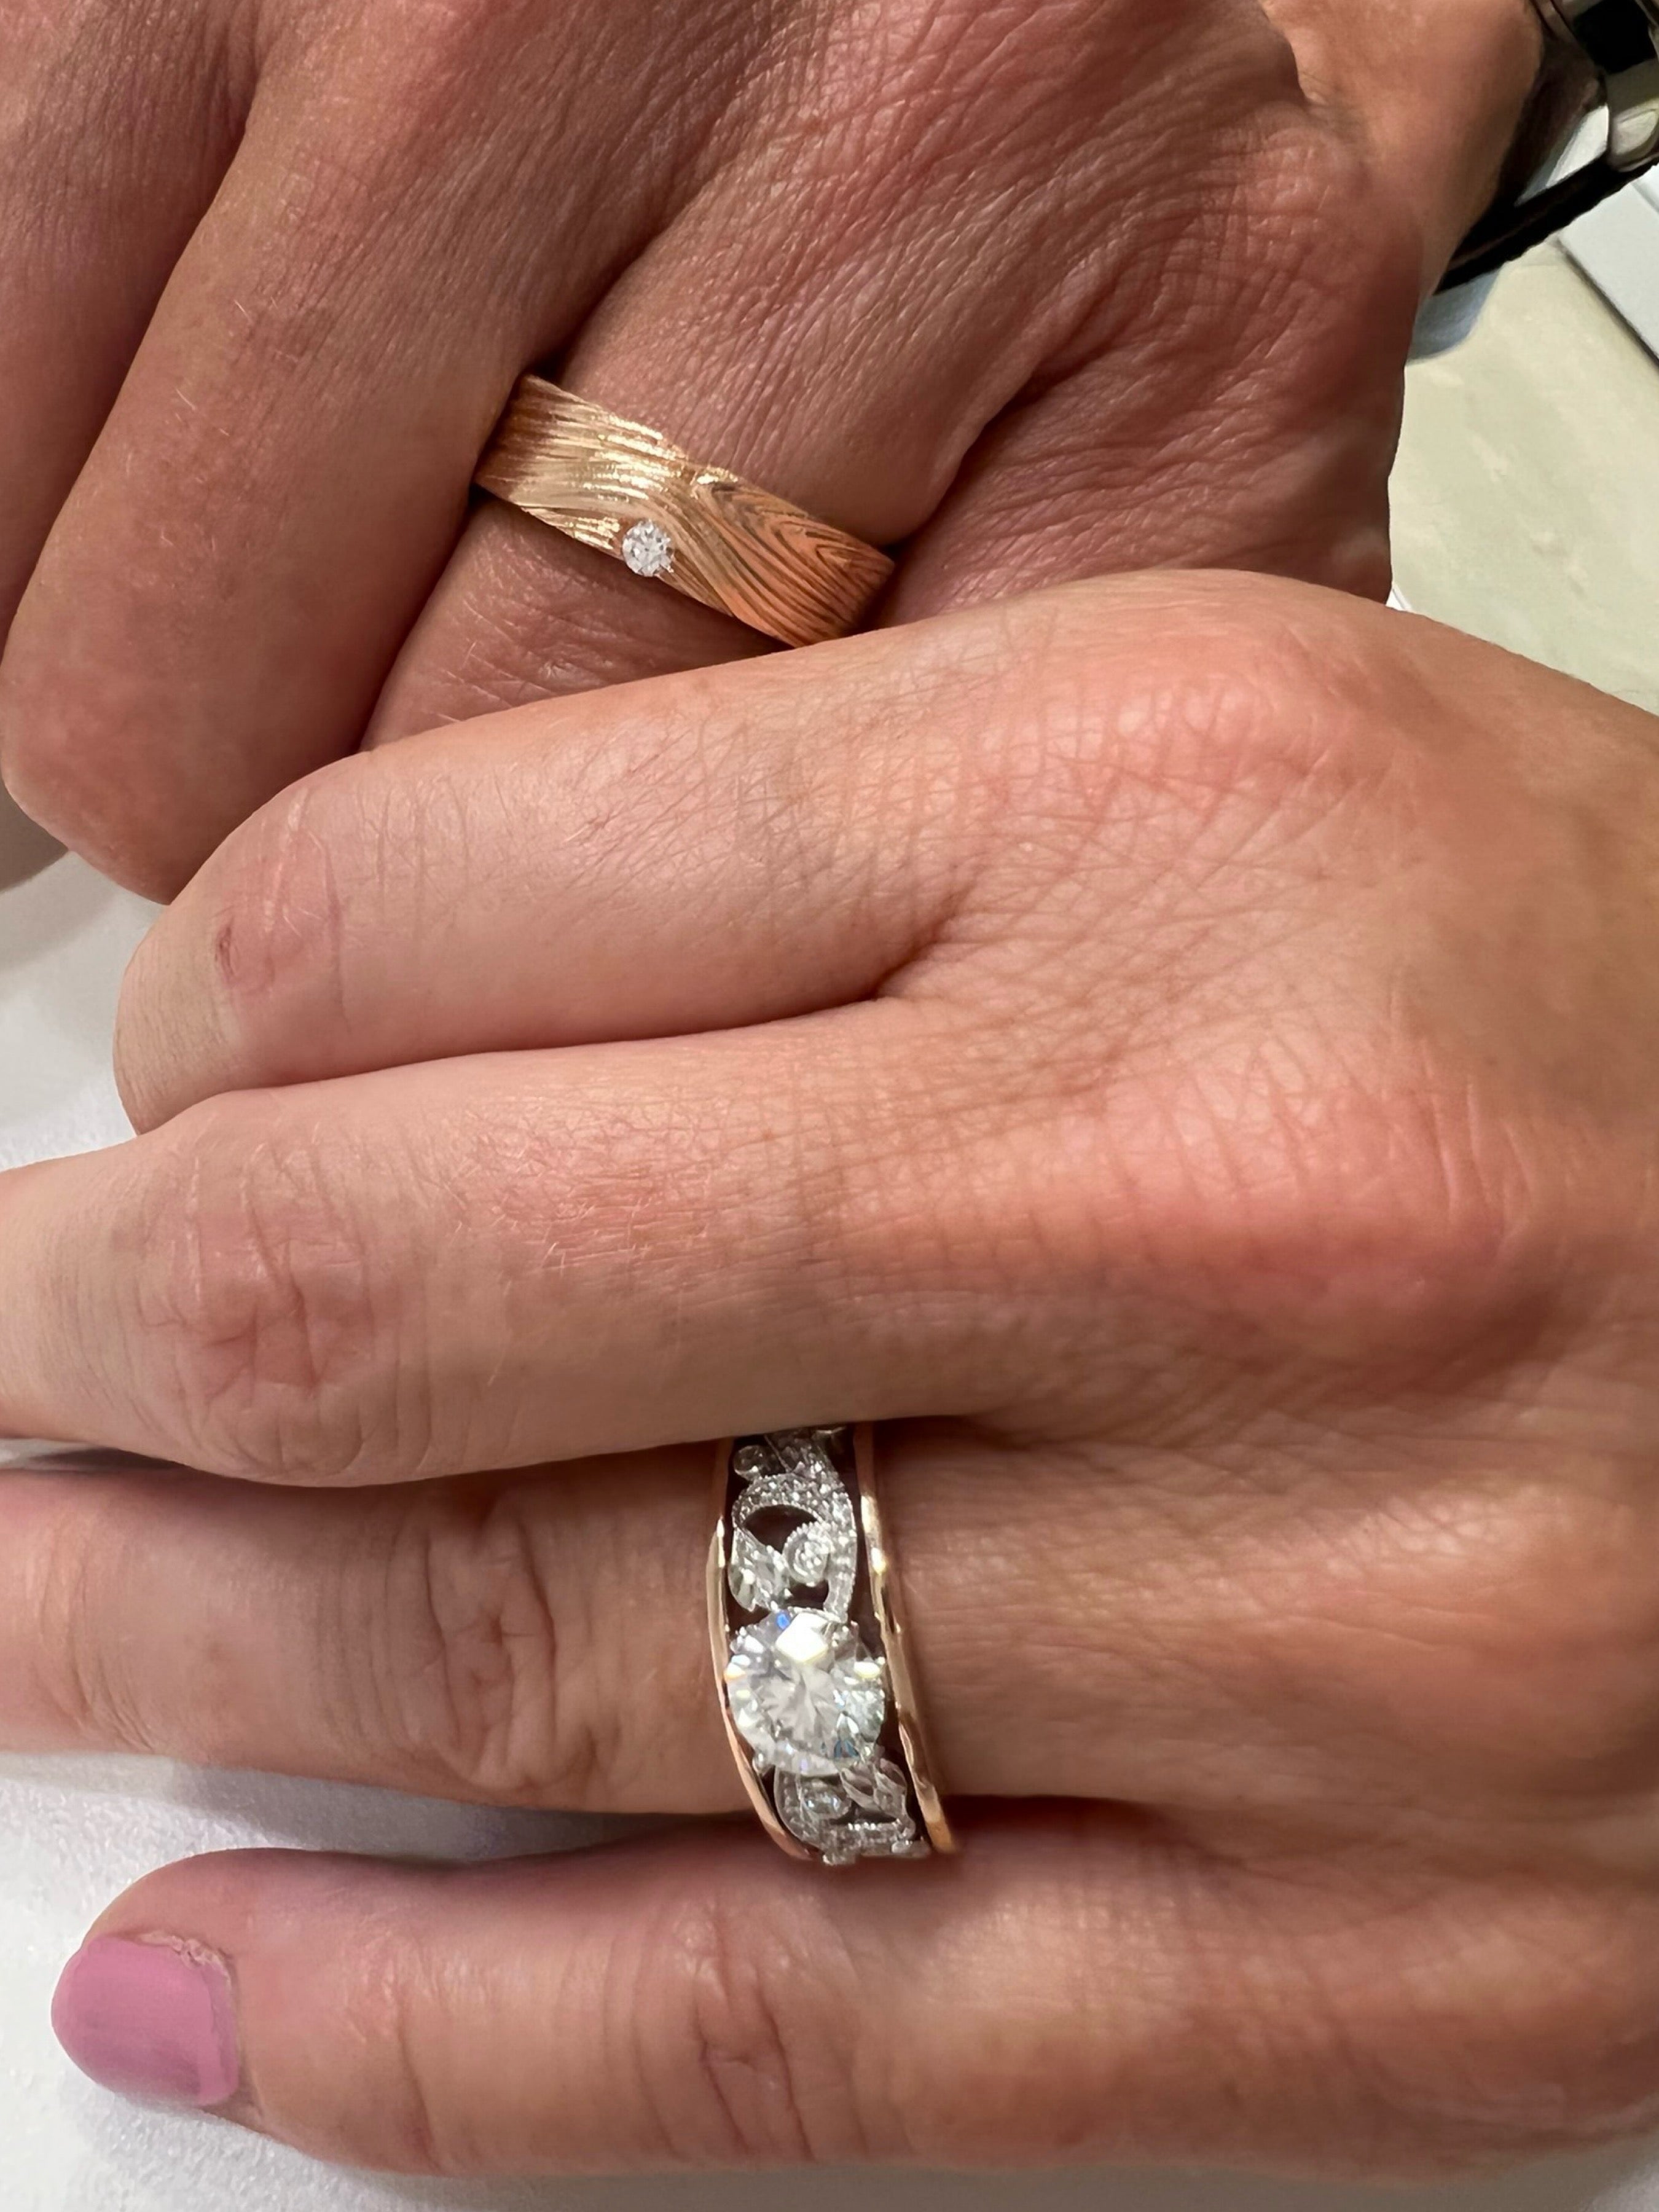 A 14k rose gold Barn Board wedding band displayed on a man’s hand with an 18k rose and white 1ct Enchanted Garden Engagement Ring on a woman’s hand.